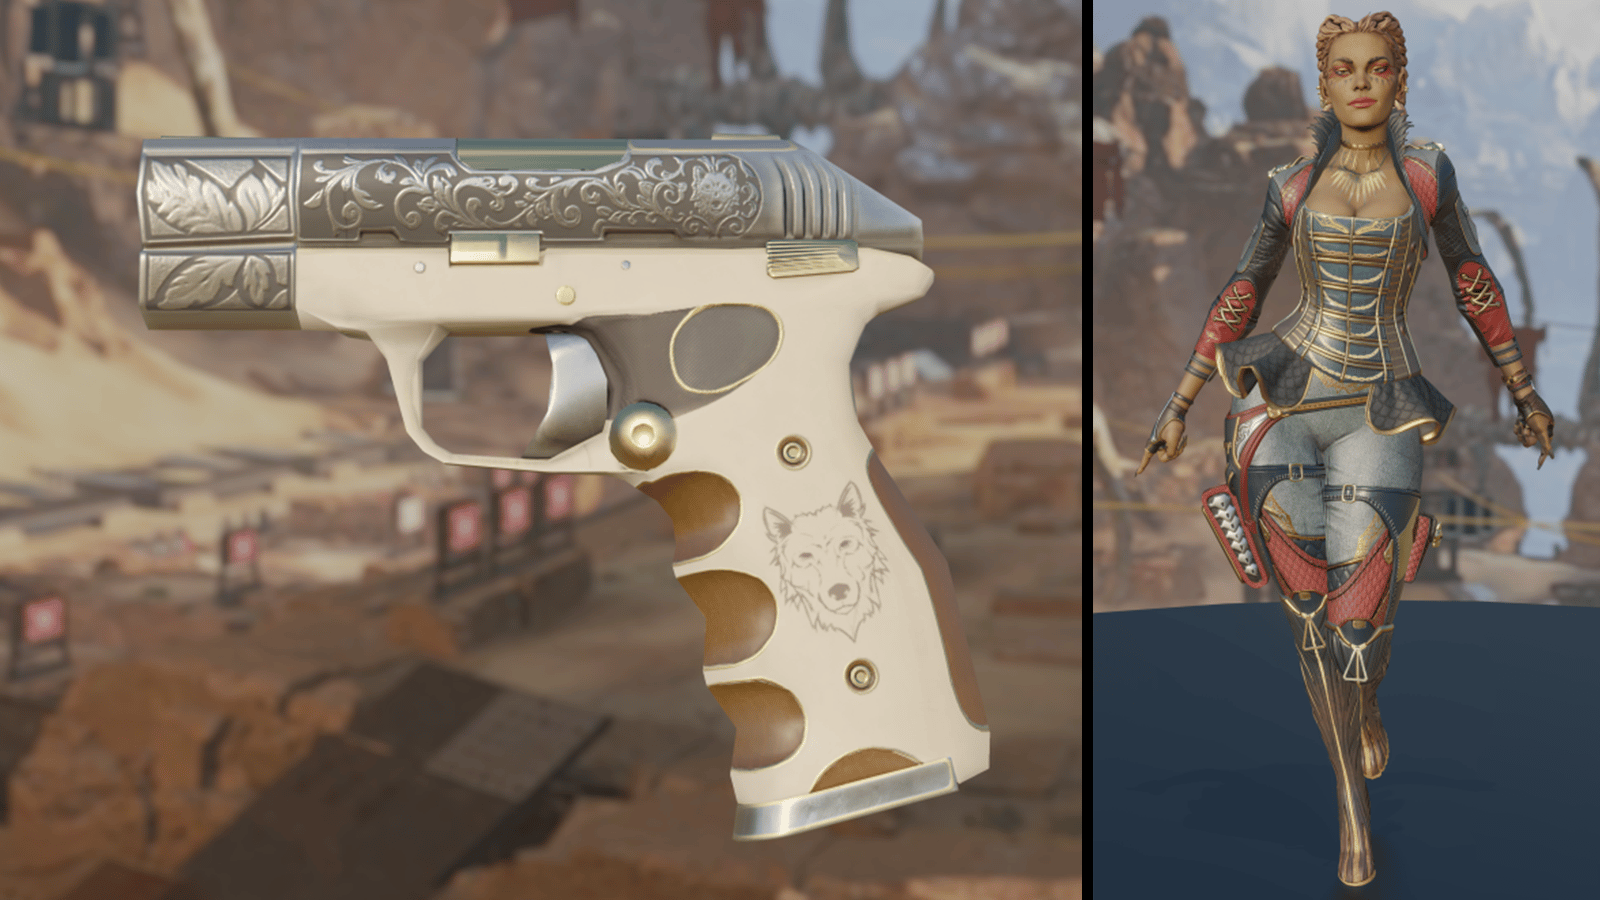 The new Summer of Plunder pistol and character skins for Loba.